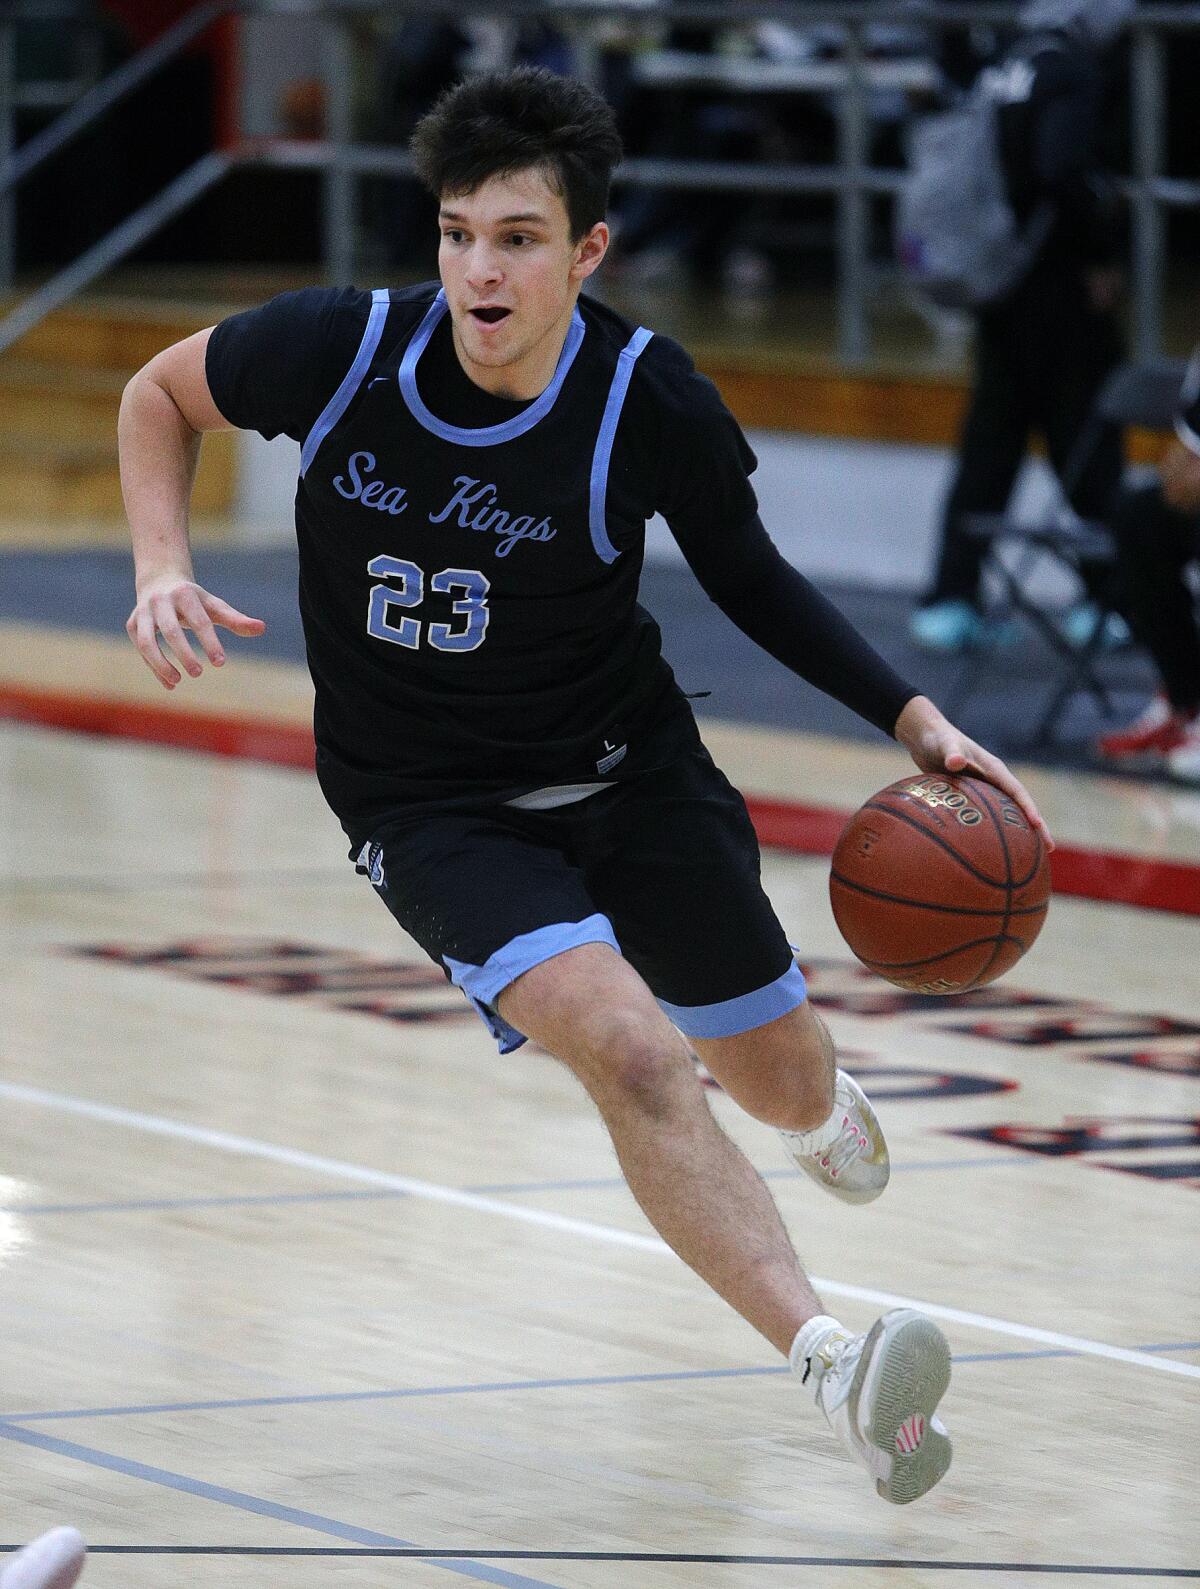 Corona del Mar's Jack Stone, pictured driving to the basket against Whittier on Dec. 4, 2019, helped the Sea Kings beat Cabrillo 89-49 on Monday.